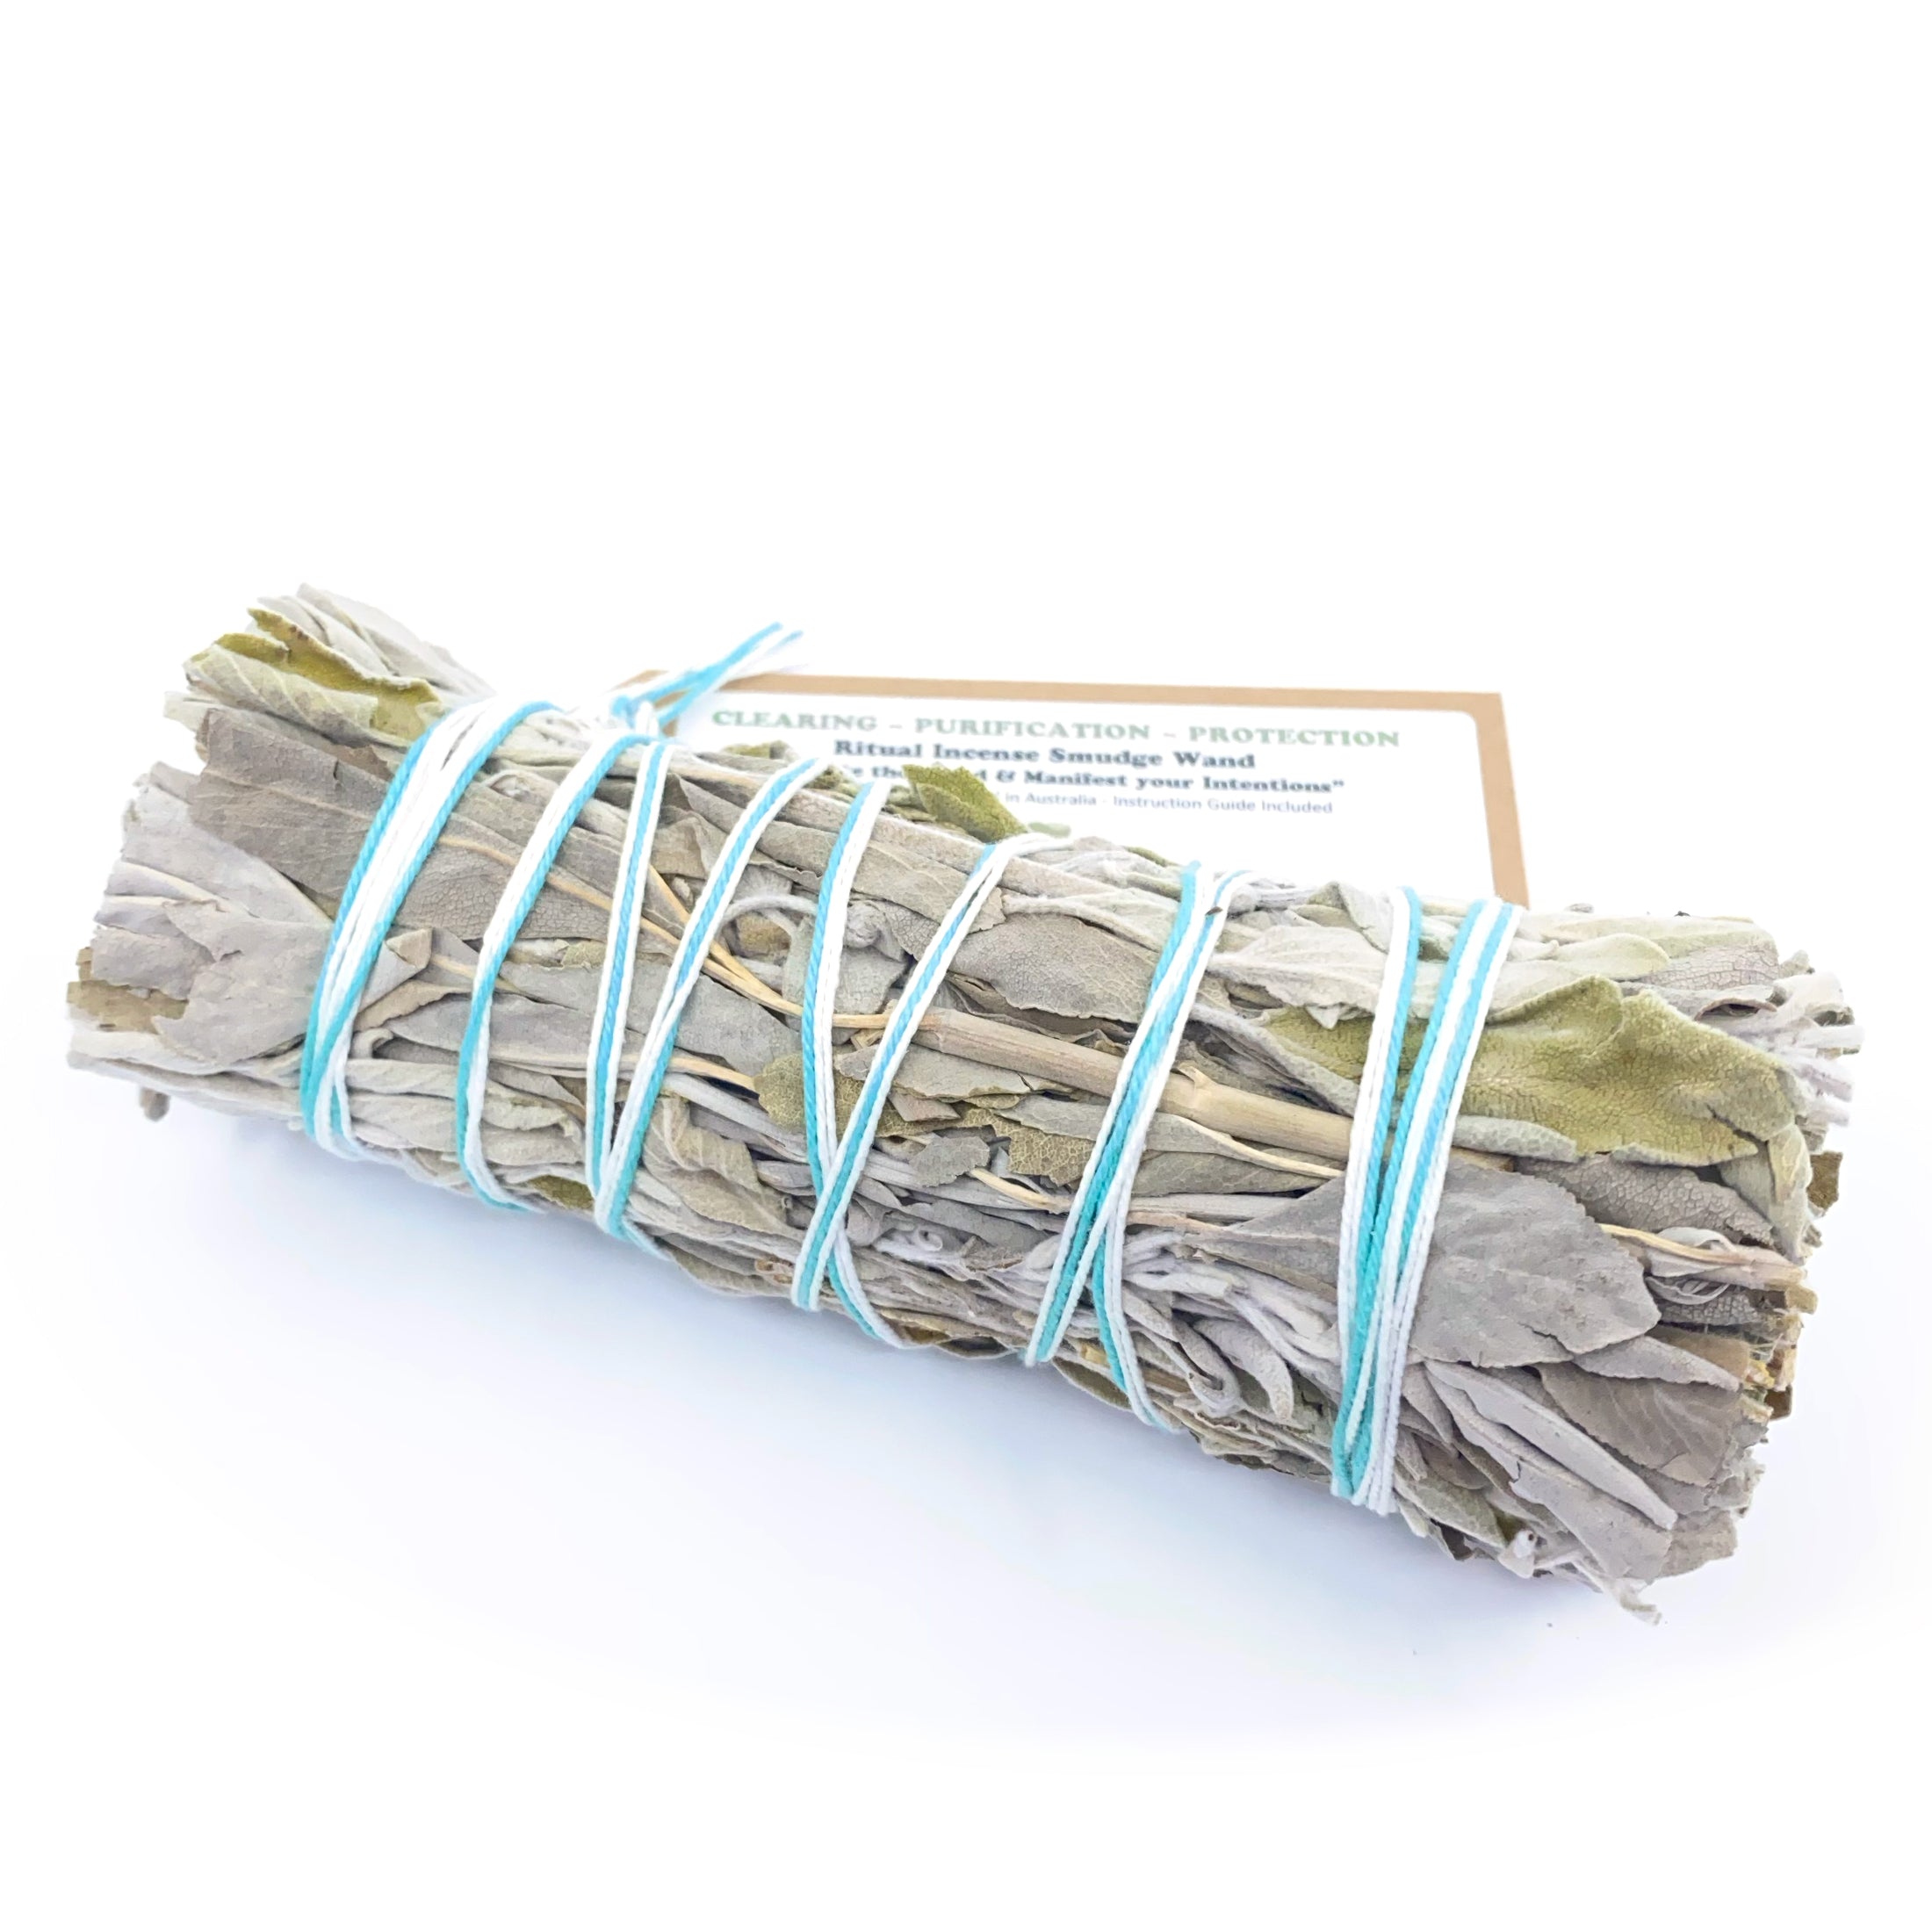 Clearing Purification Protection (Sage Only) - With Good Intentions Smudge Stick